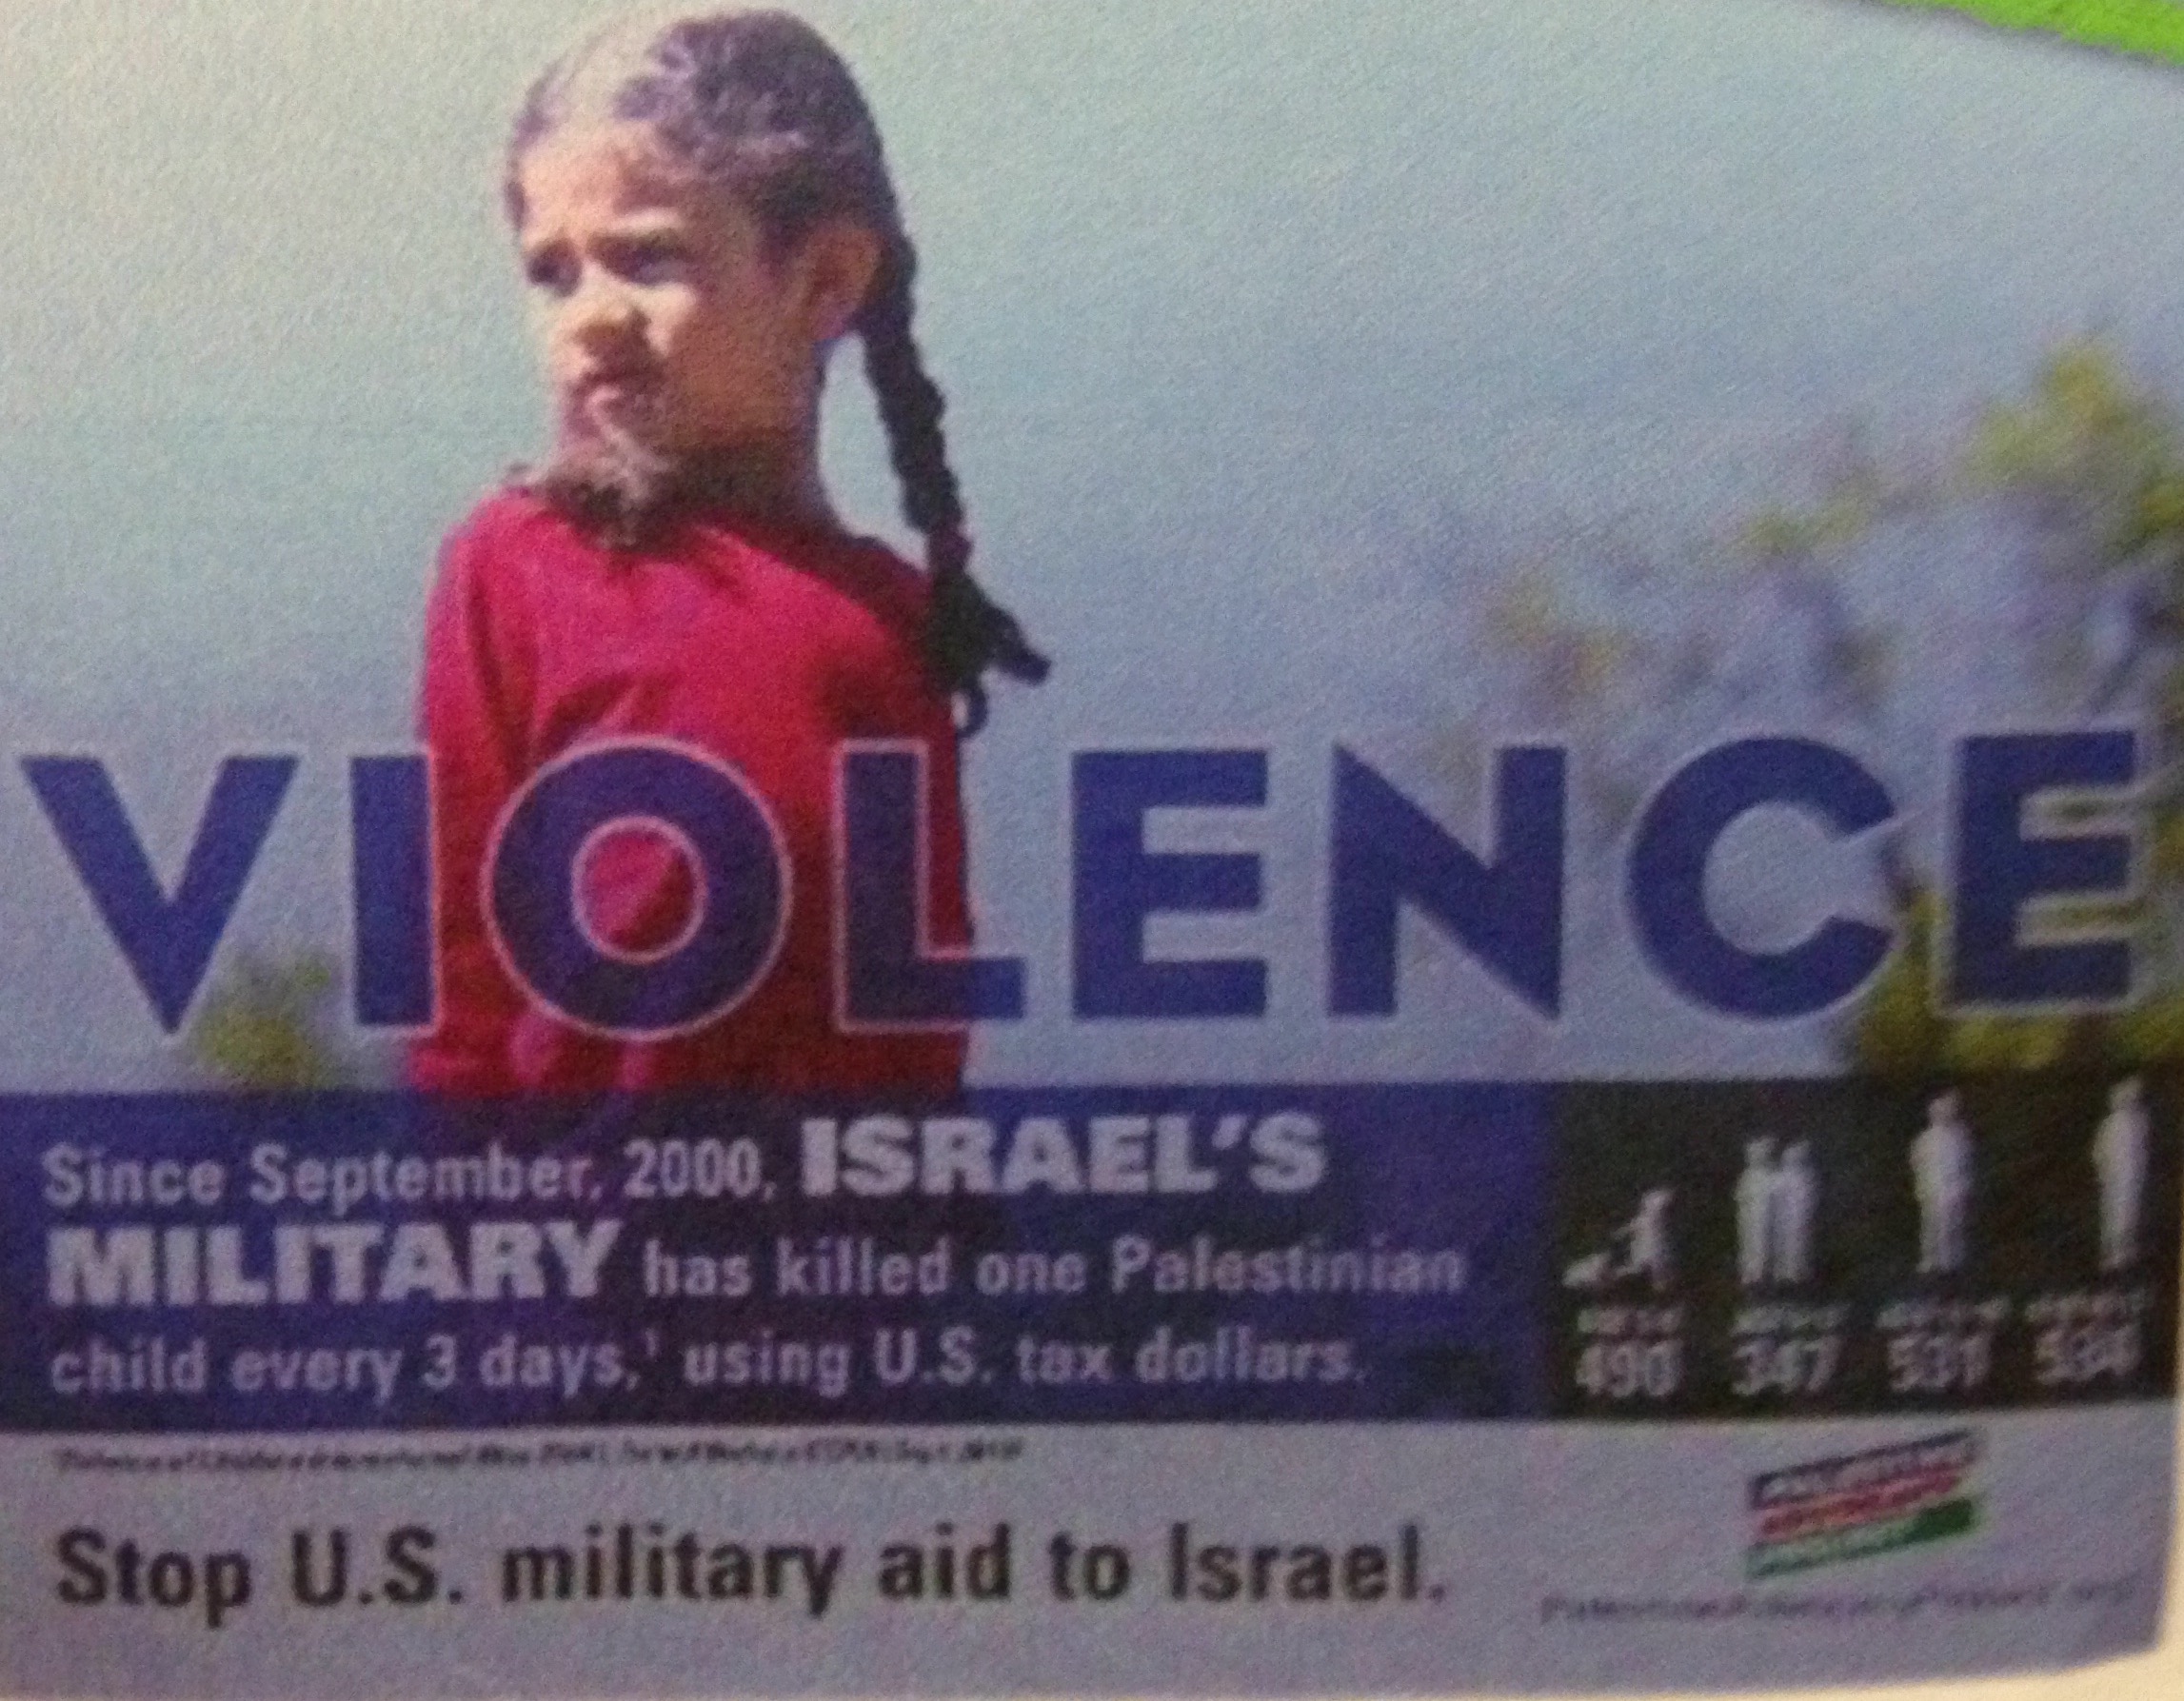 |<image-caption></p>
<p>This ad, placed by a group called the Palestine Advocacy Project, sparked controve|SPENCER BUELL/METRO” title=”|<image-caption>
<p>This ad, placed by a group called the Palestine Advocacy Project, sparked controve|SPENCER BUELL/METRO” /></div>
<p><!-- END scald=2538 --></div>
</div>
<p>Before the decision, dozens turned out to the meeting of the MBTA fiscal and management control board to offer passionate opposition to the ad and the policy that allowed it to run.</p>
<p>Speakers claimed the ad promoted violence against Jewish people and called it inaccurate.
<p>Charles Jacobs, president of the Watertown-based Americans for Peace and Tolerance, called it “slander against the Jewish people” and said it would “incite hatred against my community.”
<p><em><strong>RELATED: <a href=